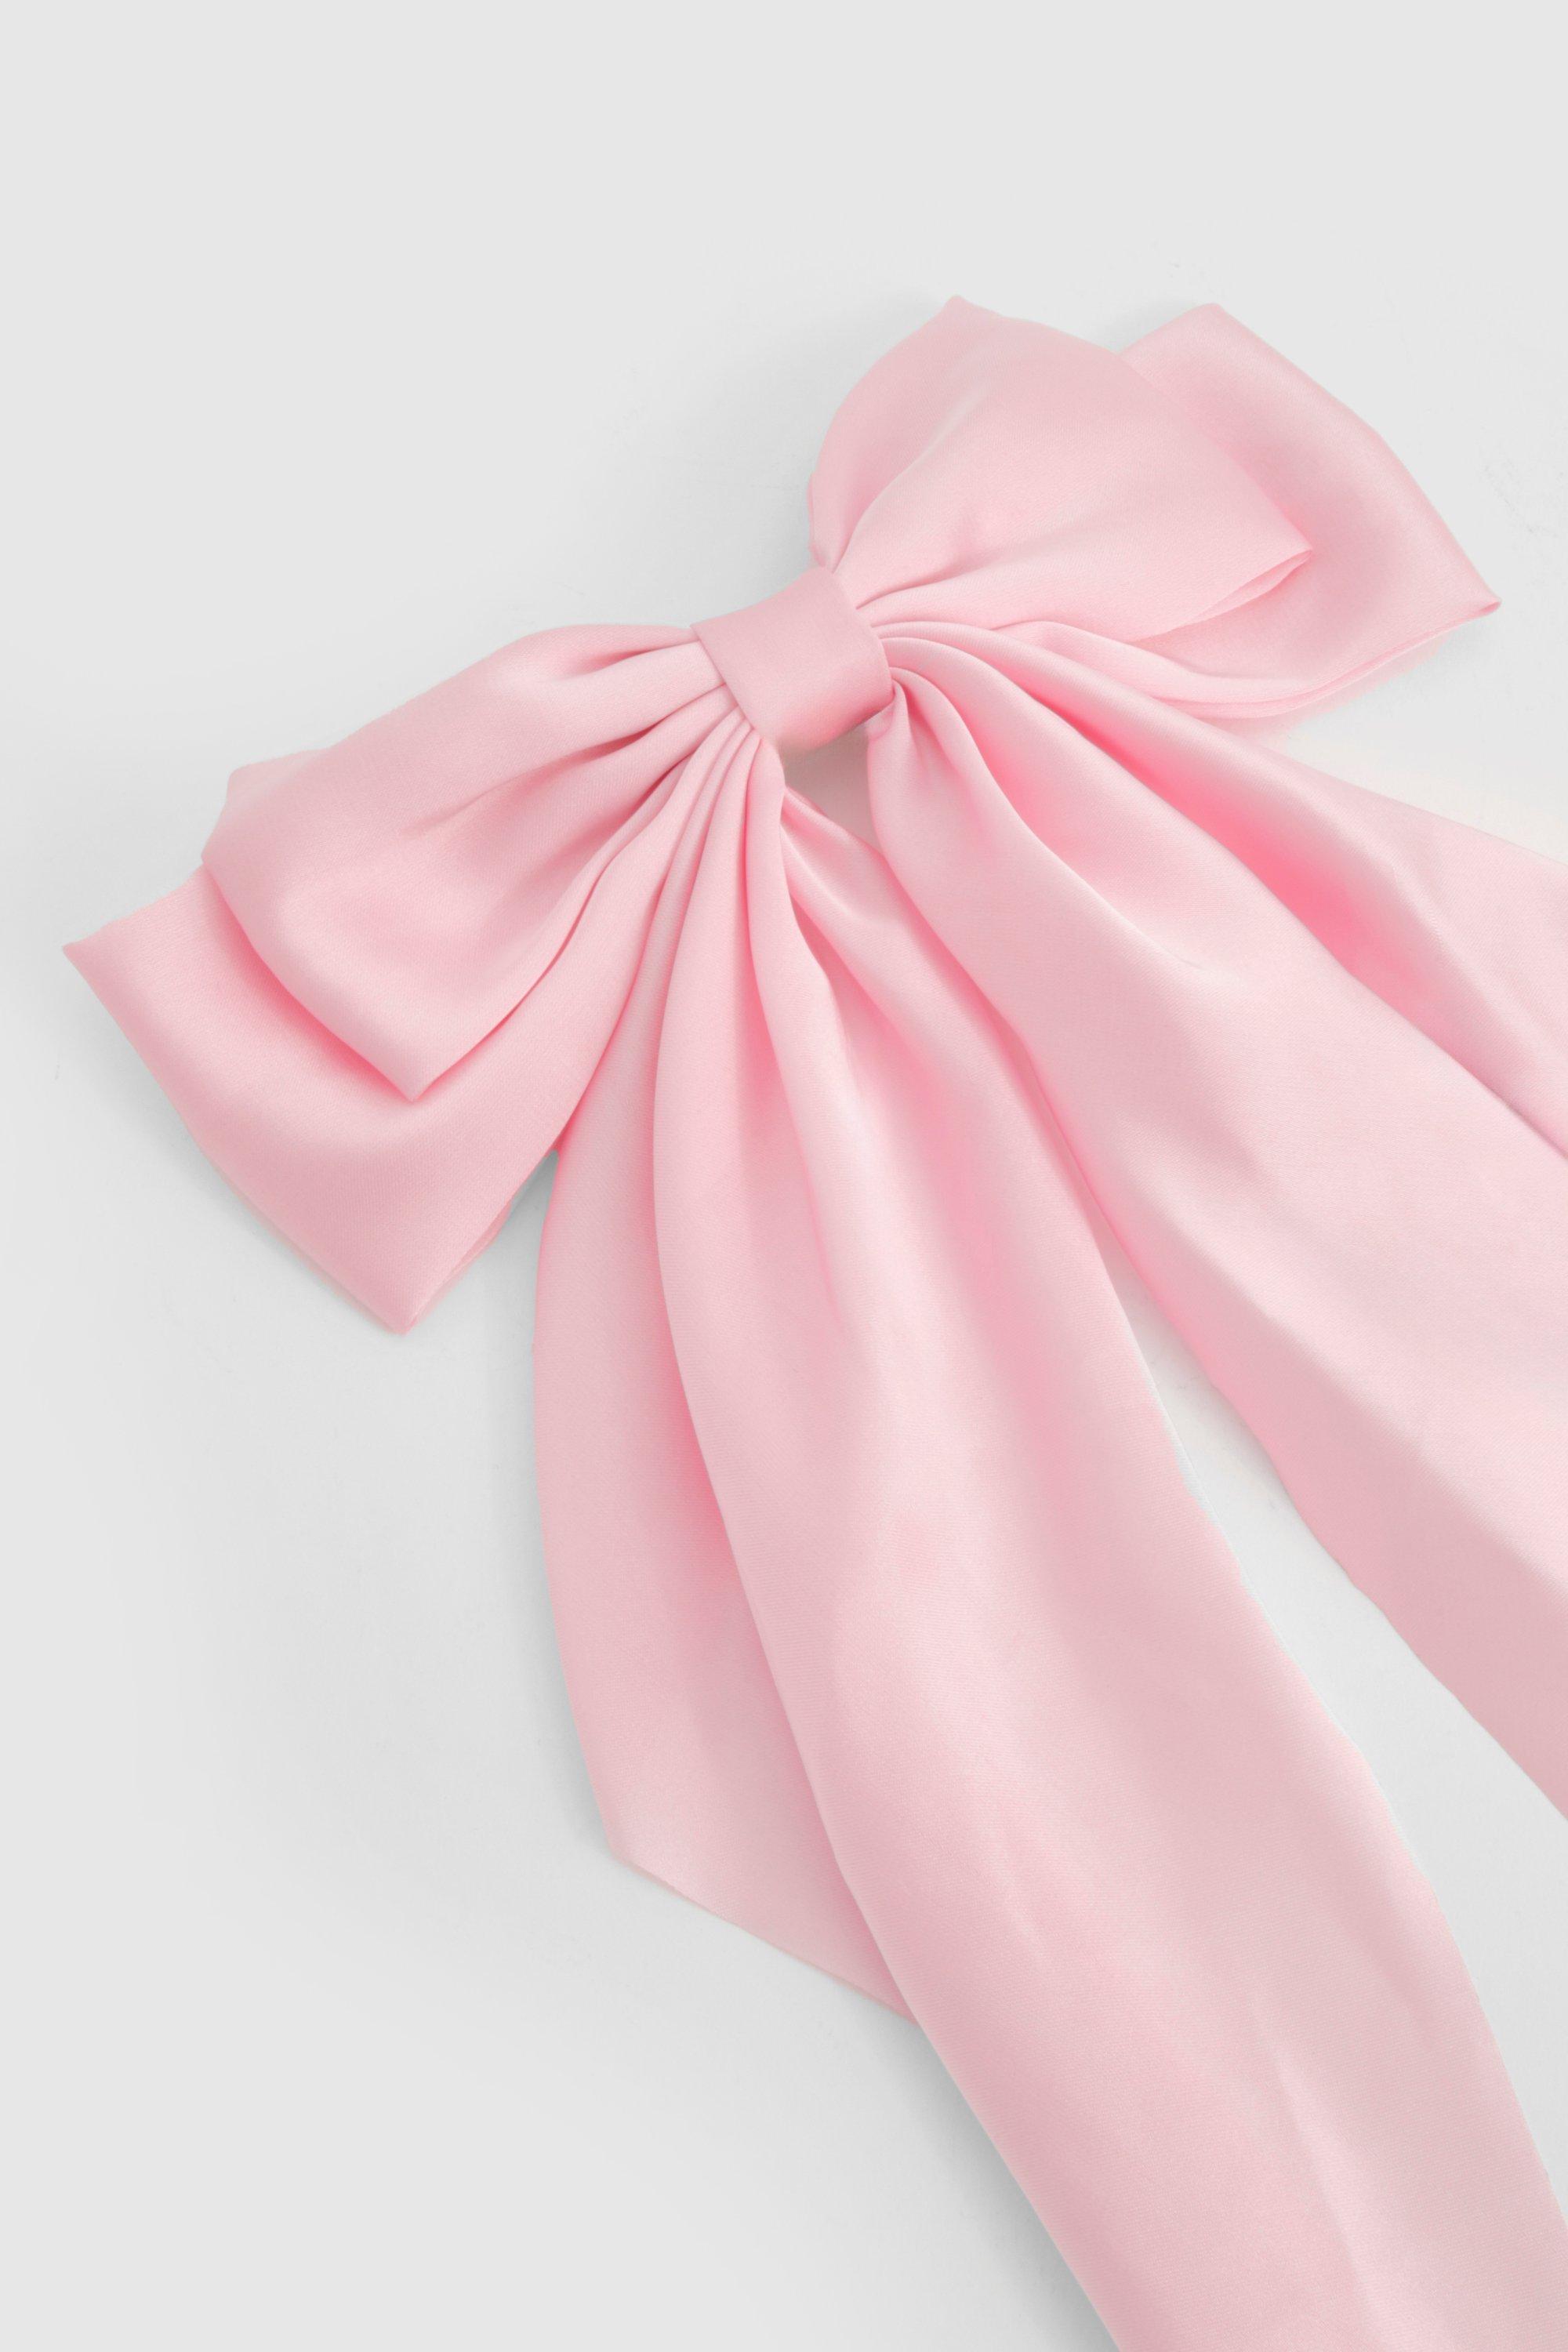 Image of Oversized Baby Pink Satin Bow Hair Clip, Pink